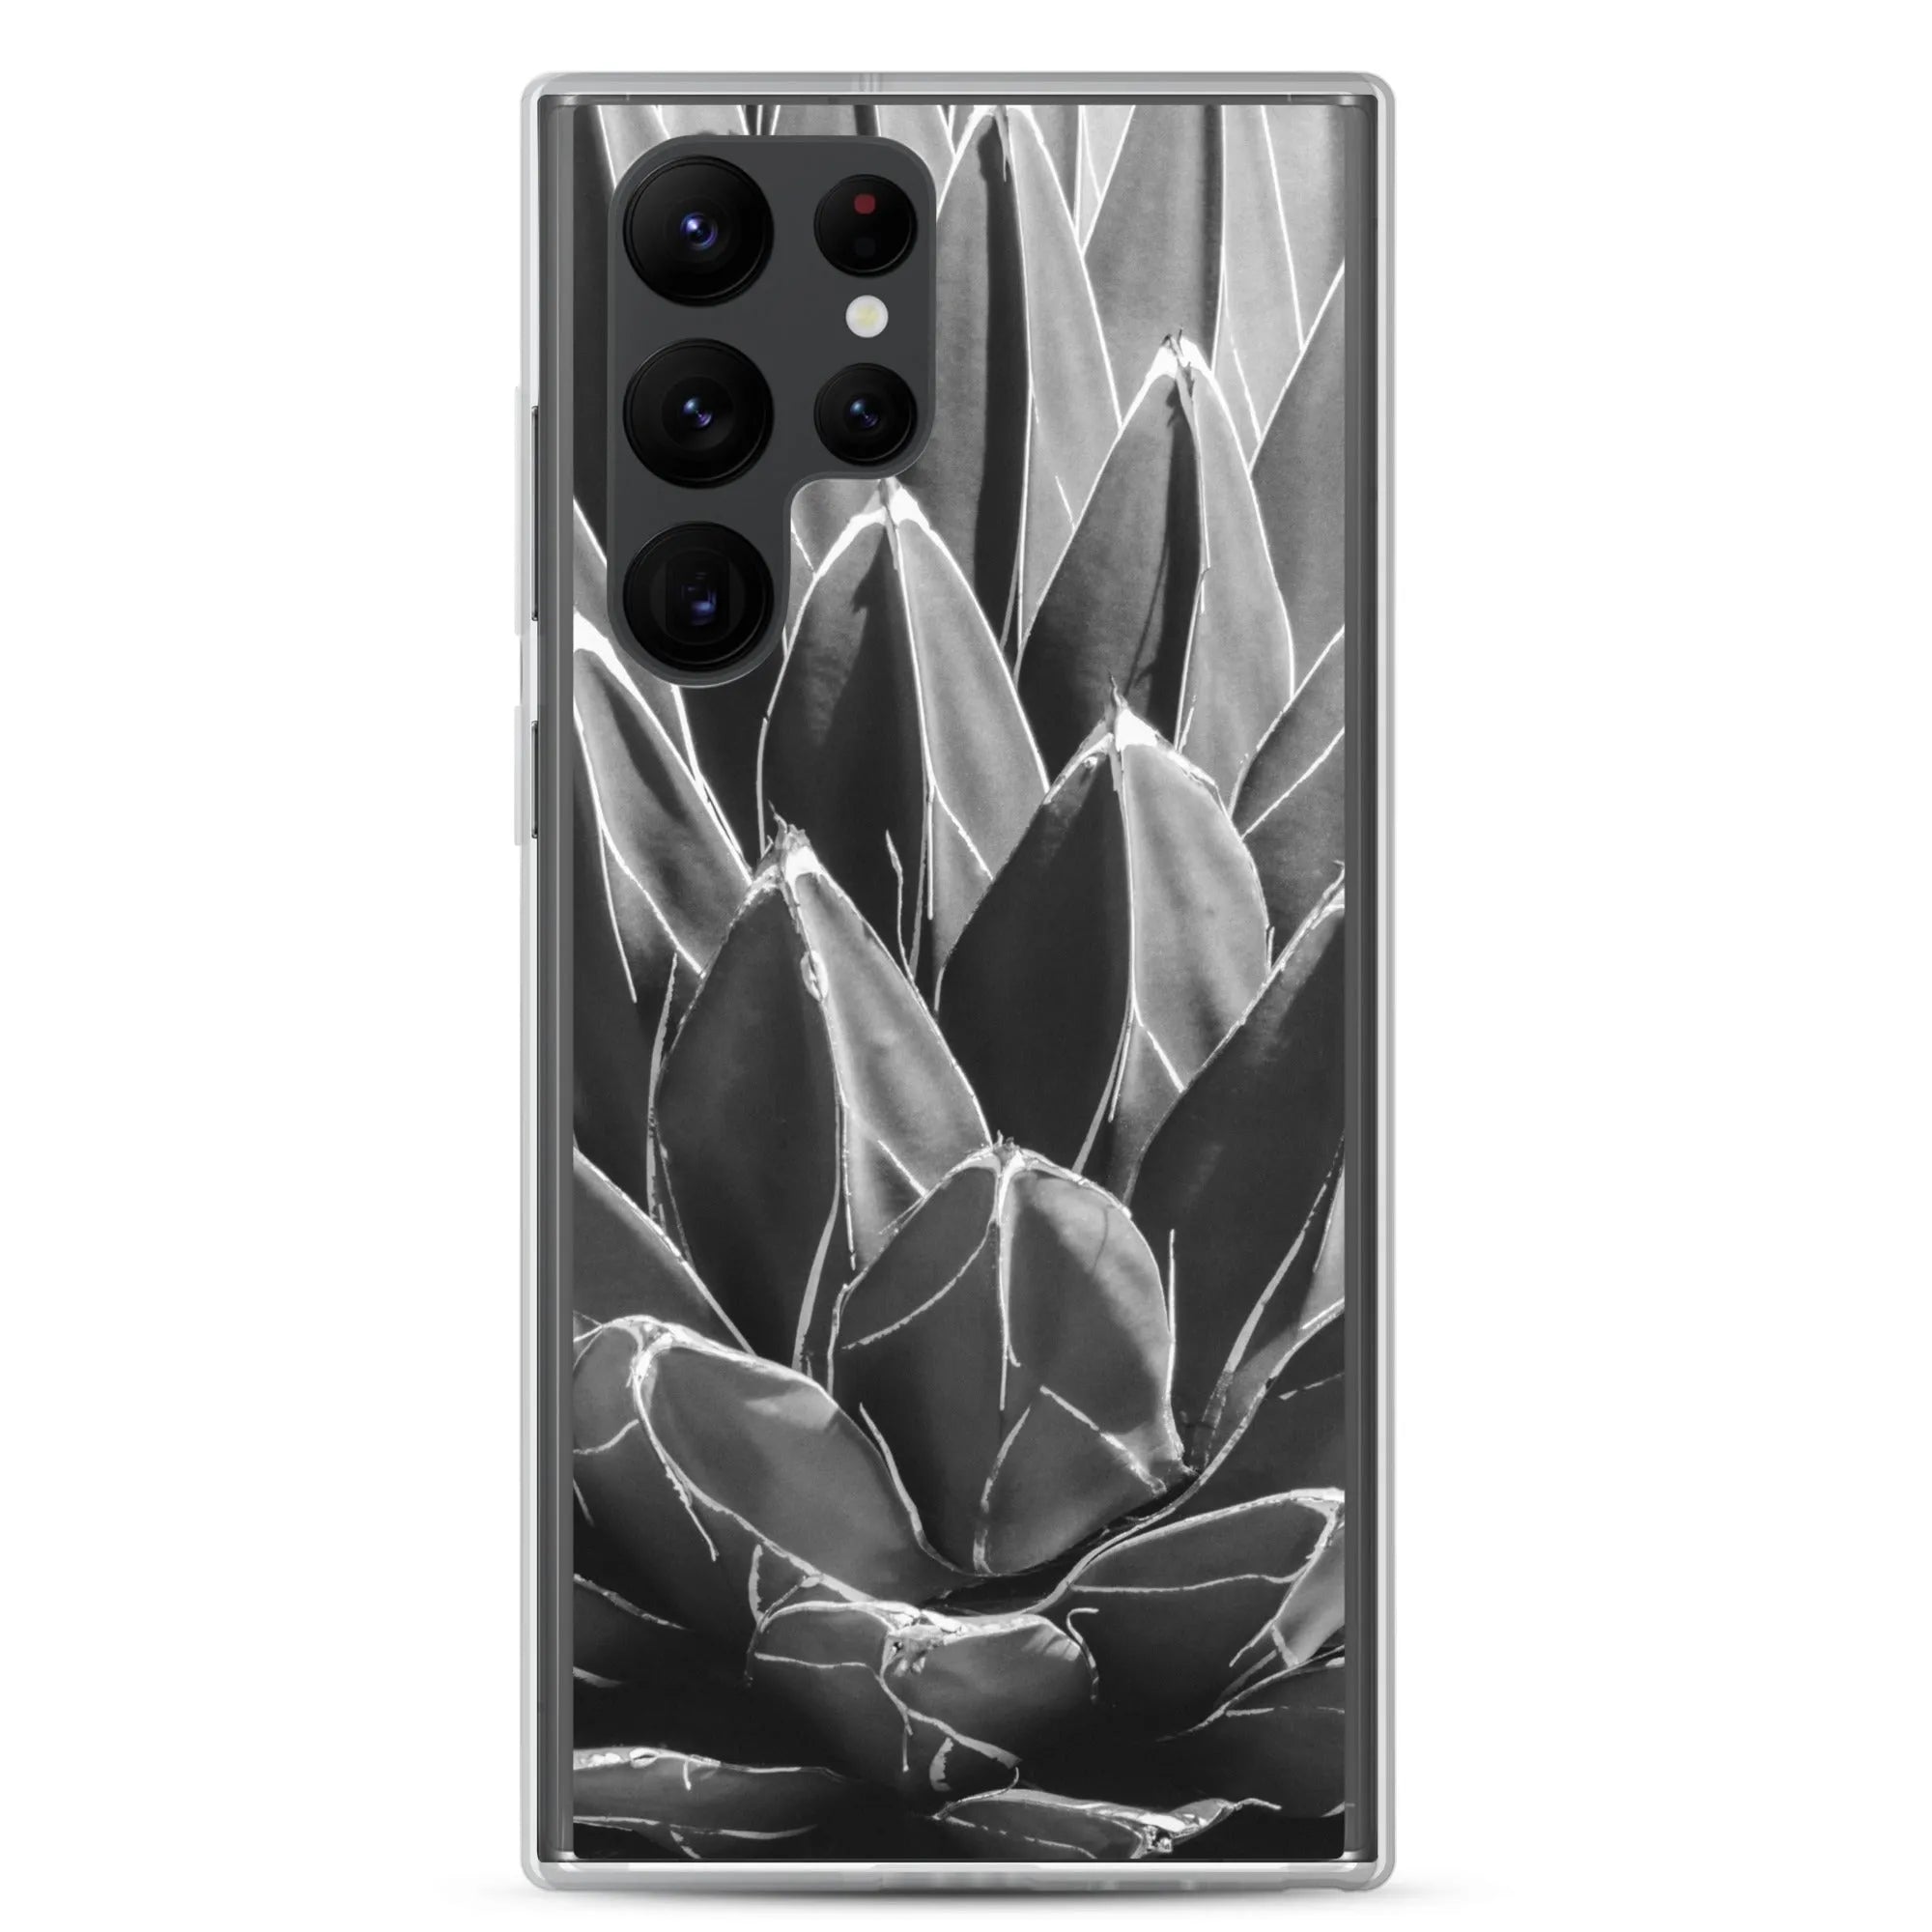 Decked Out Samsung Galaxy Case - Black And White - Samsung Galaxy S22 Ultra - Mobile Phone Cases - Aesthetic Art